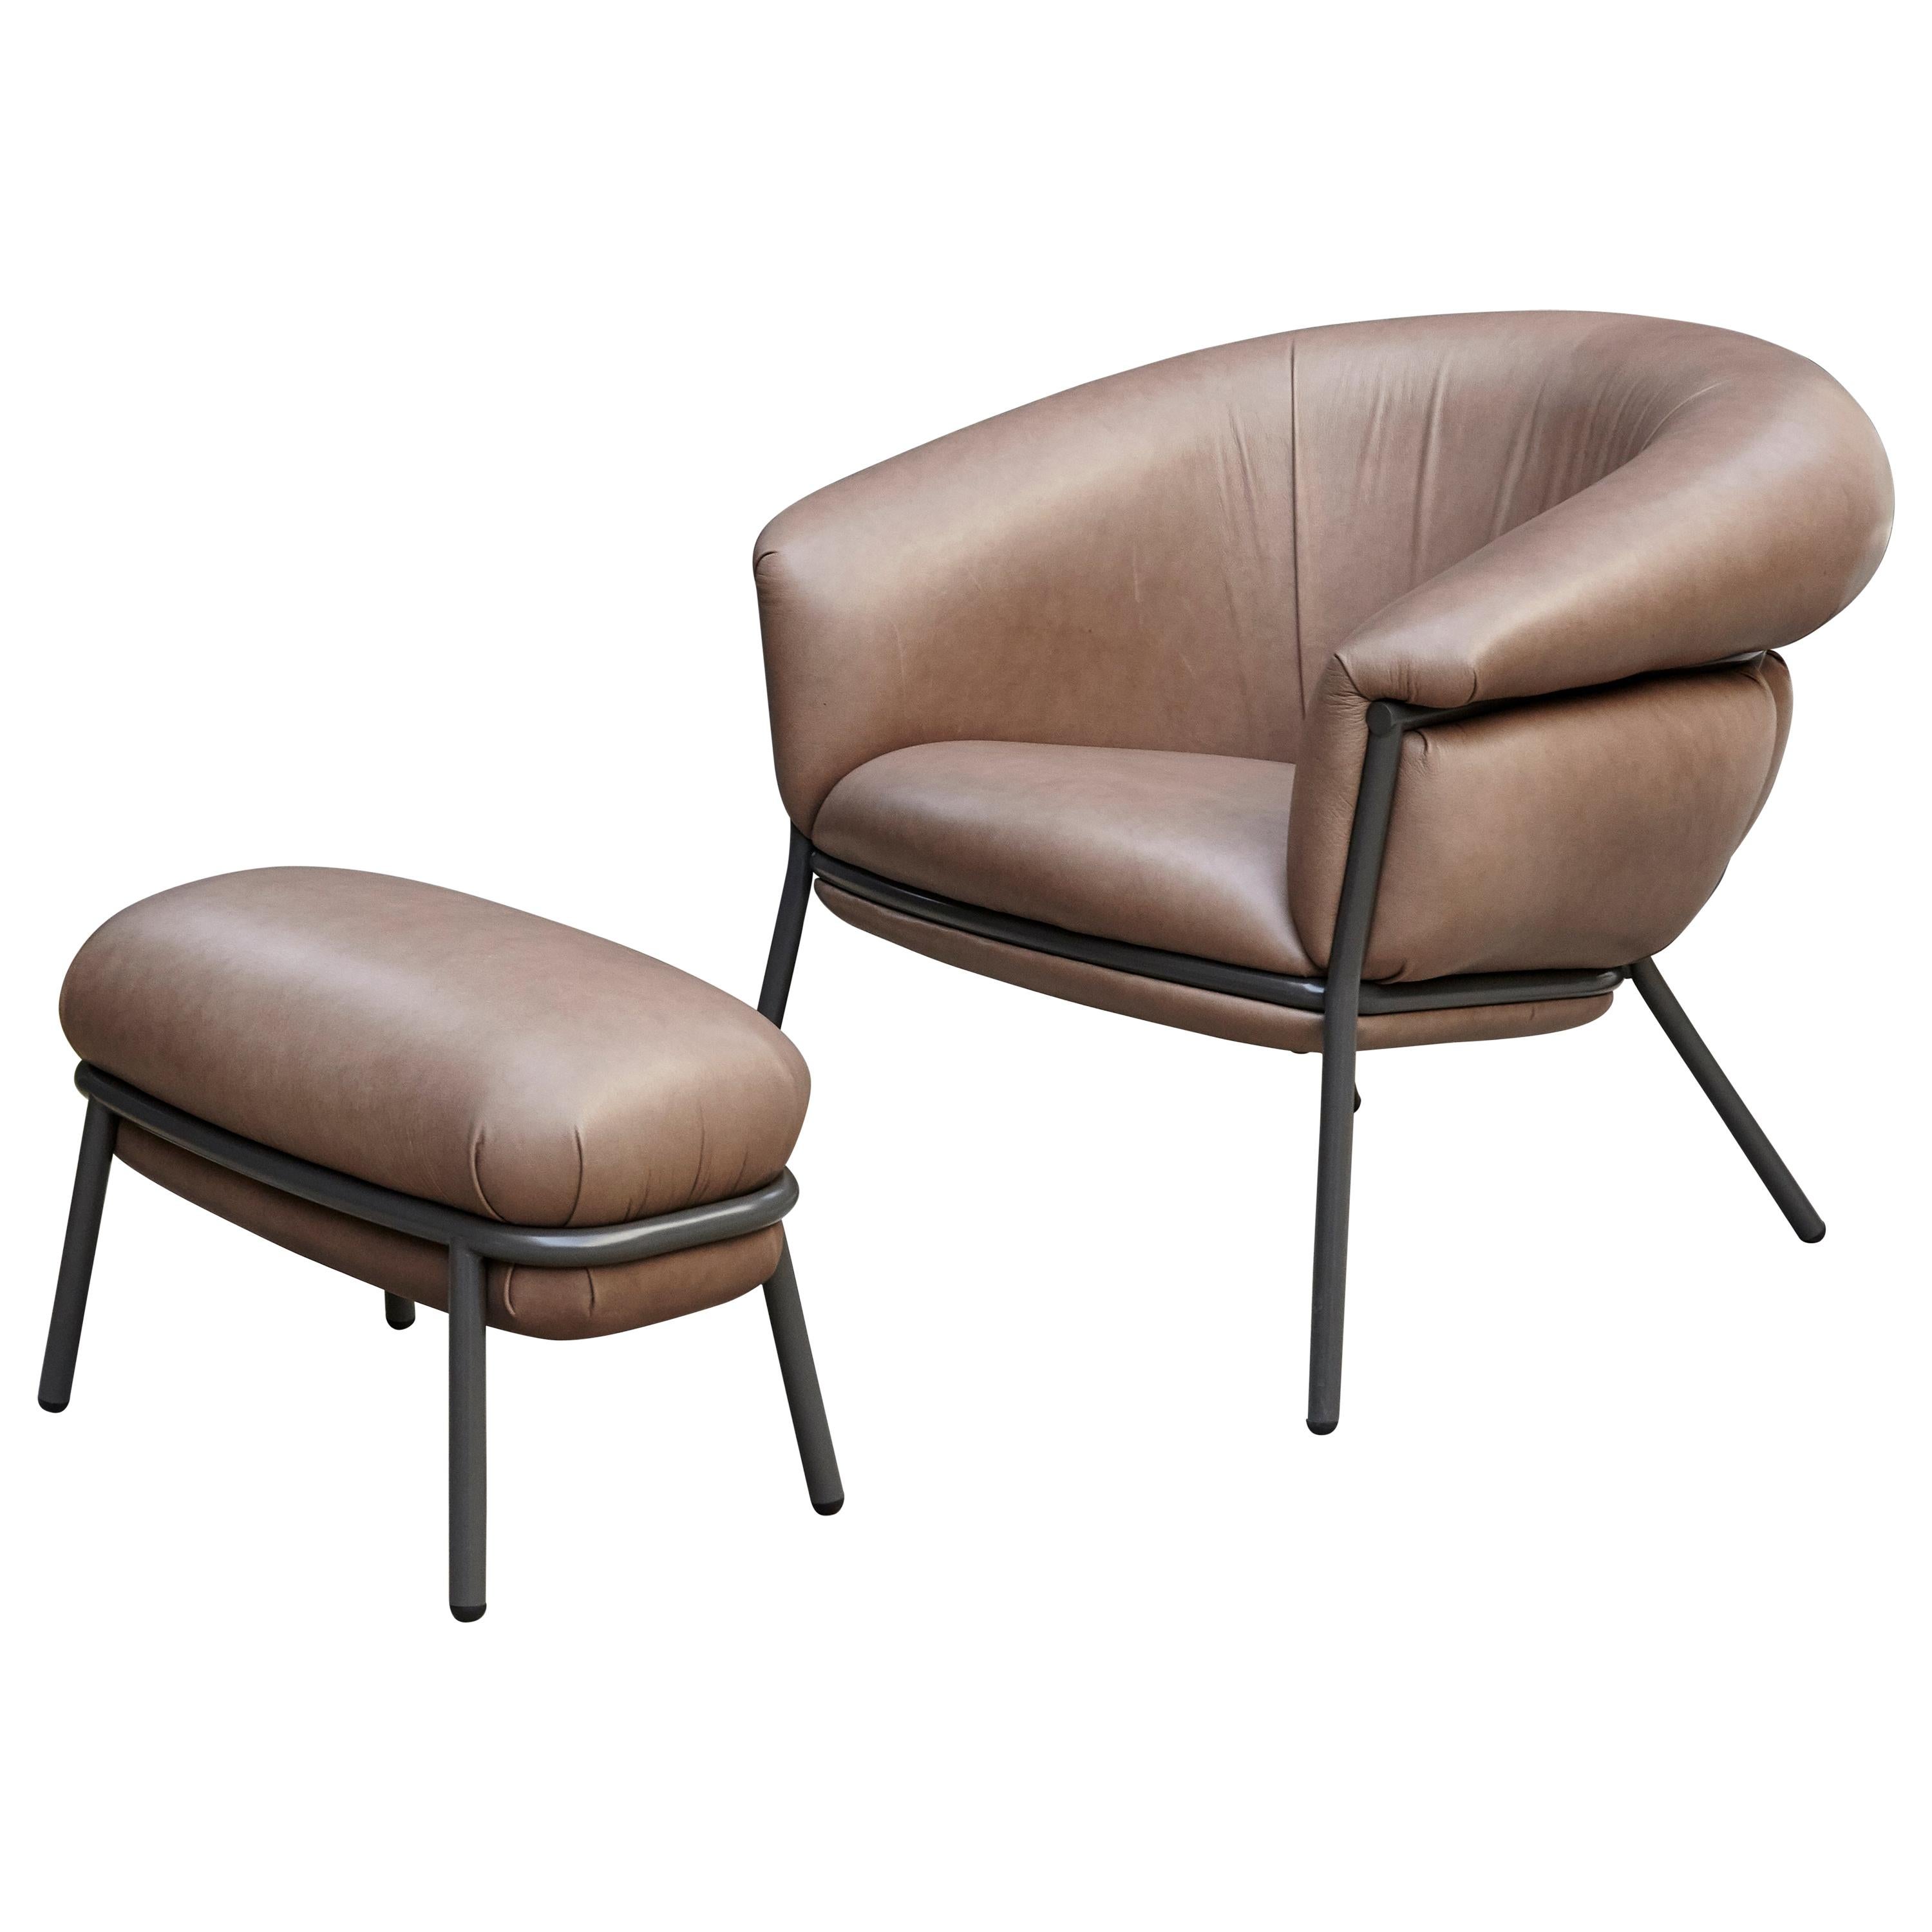 Grasso Brown Leather and Lacquered Metal Armchair for BD by Stephen Burks